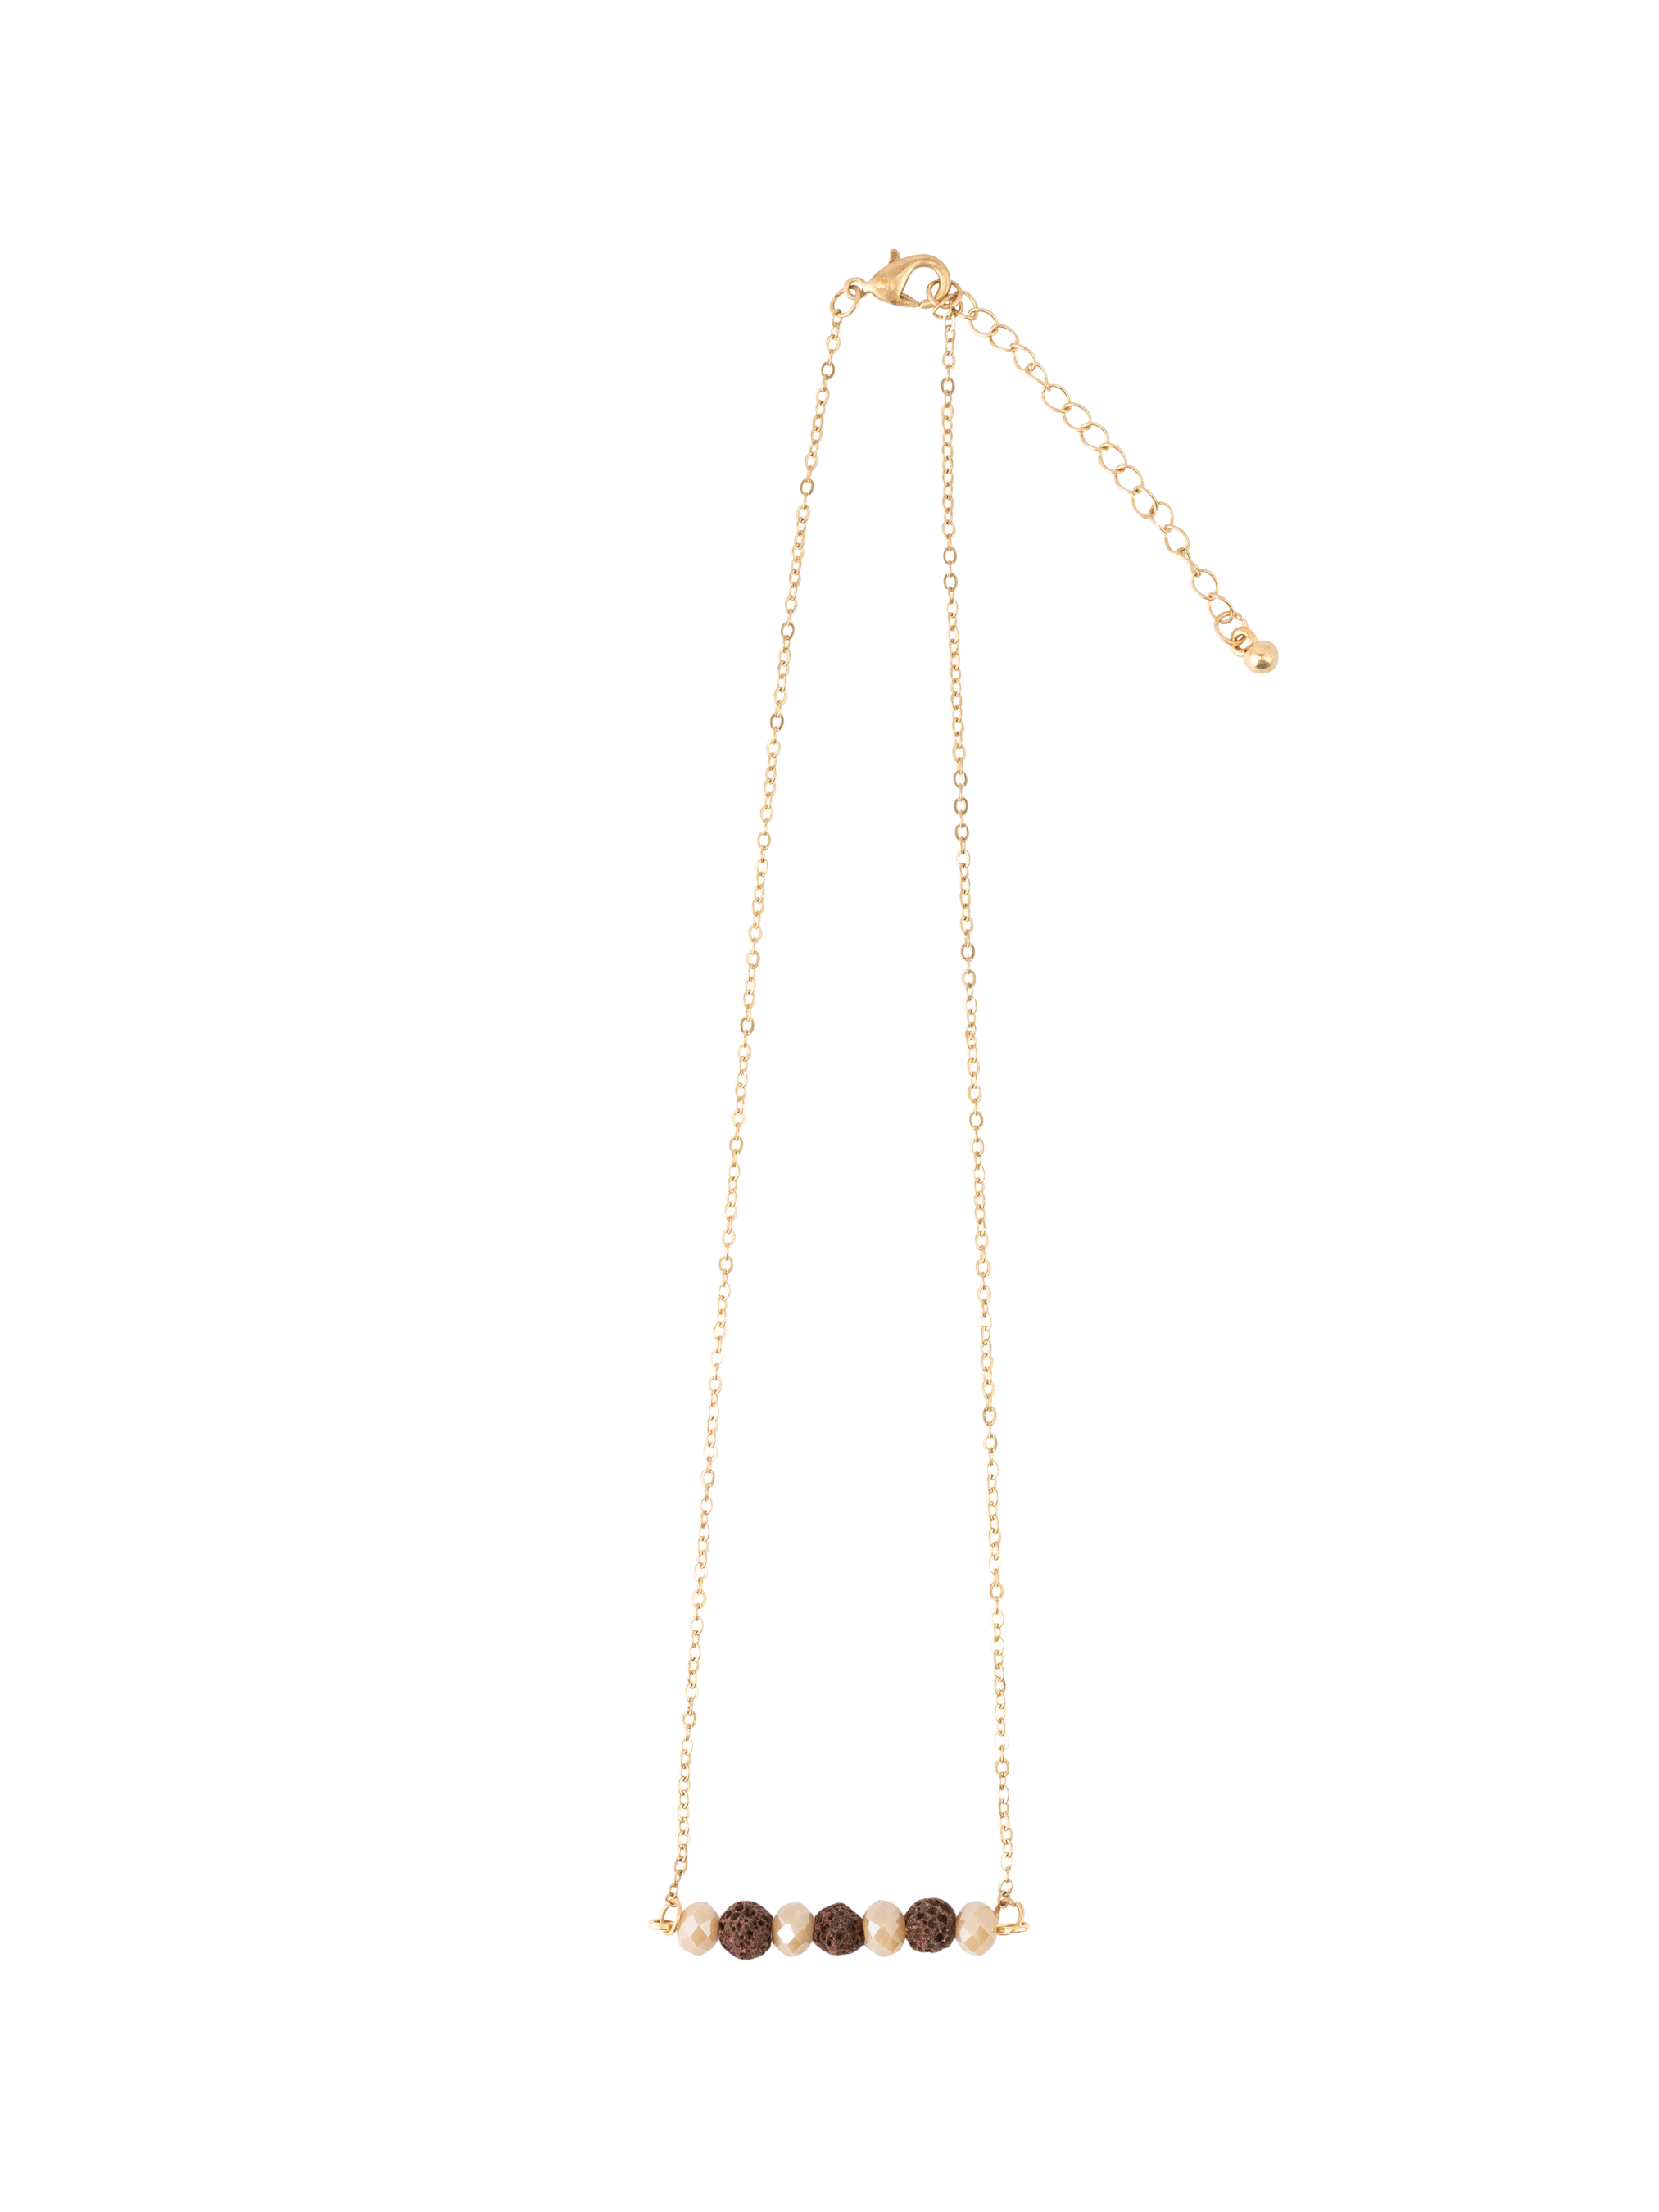 Champagne Crystals + Lava Beads Bar Necklace